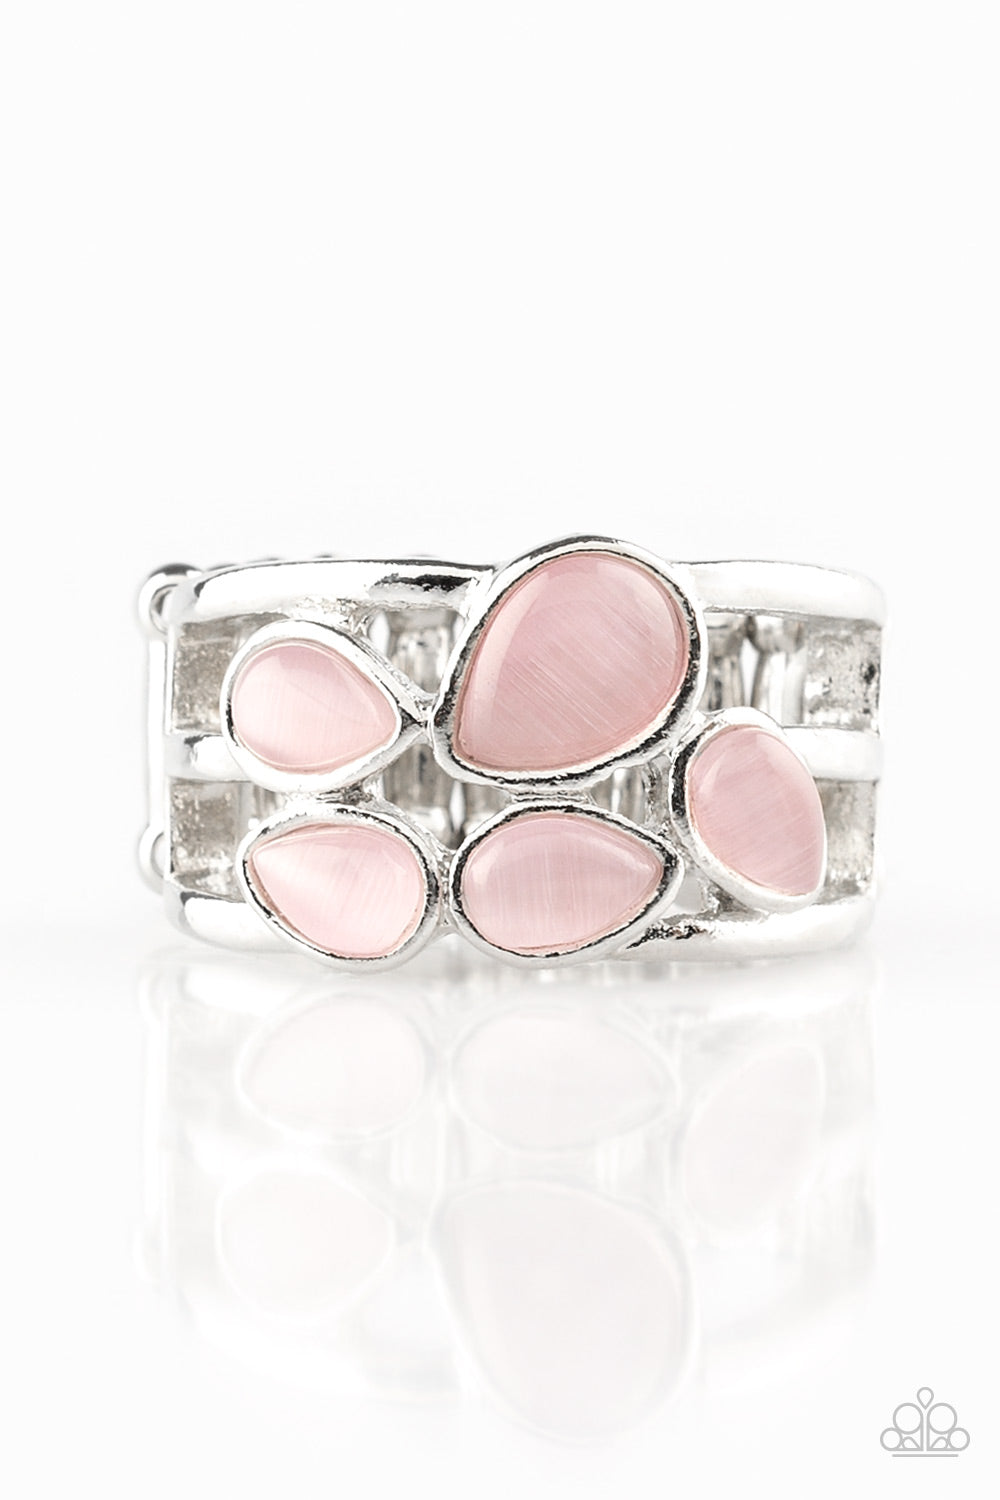 Dreamy Glow Pink Paparazzi Rings Cashmere Pink Jewels - Cashmere Pink Jewels & Accessories, Cashmere Pink Jewels & Accessories - Paparazzi